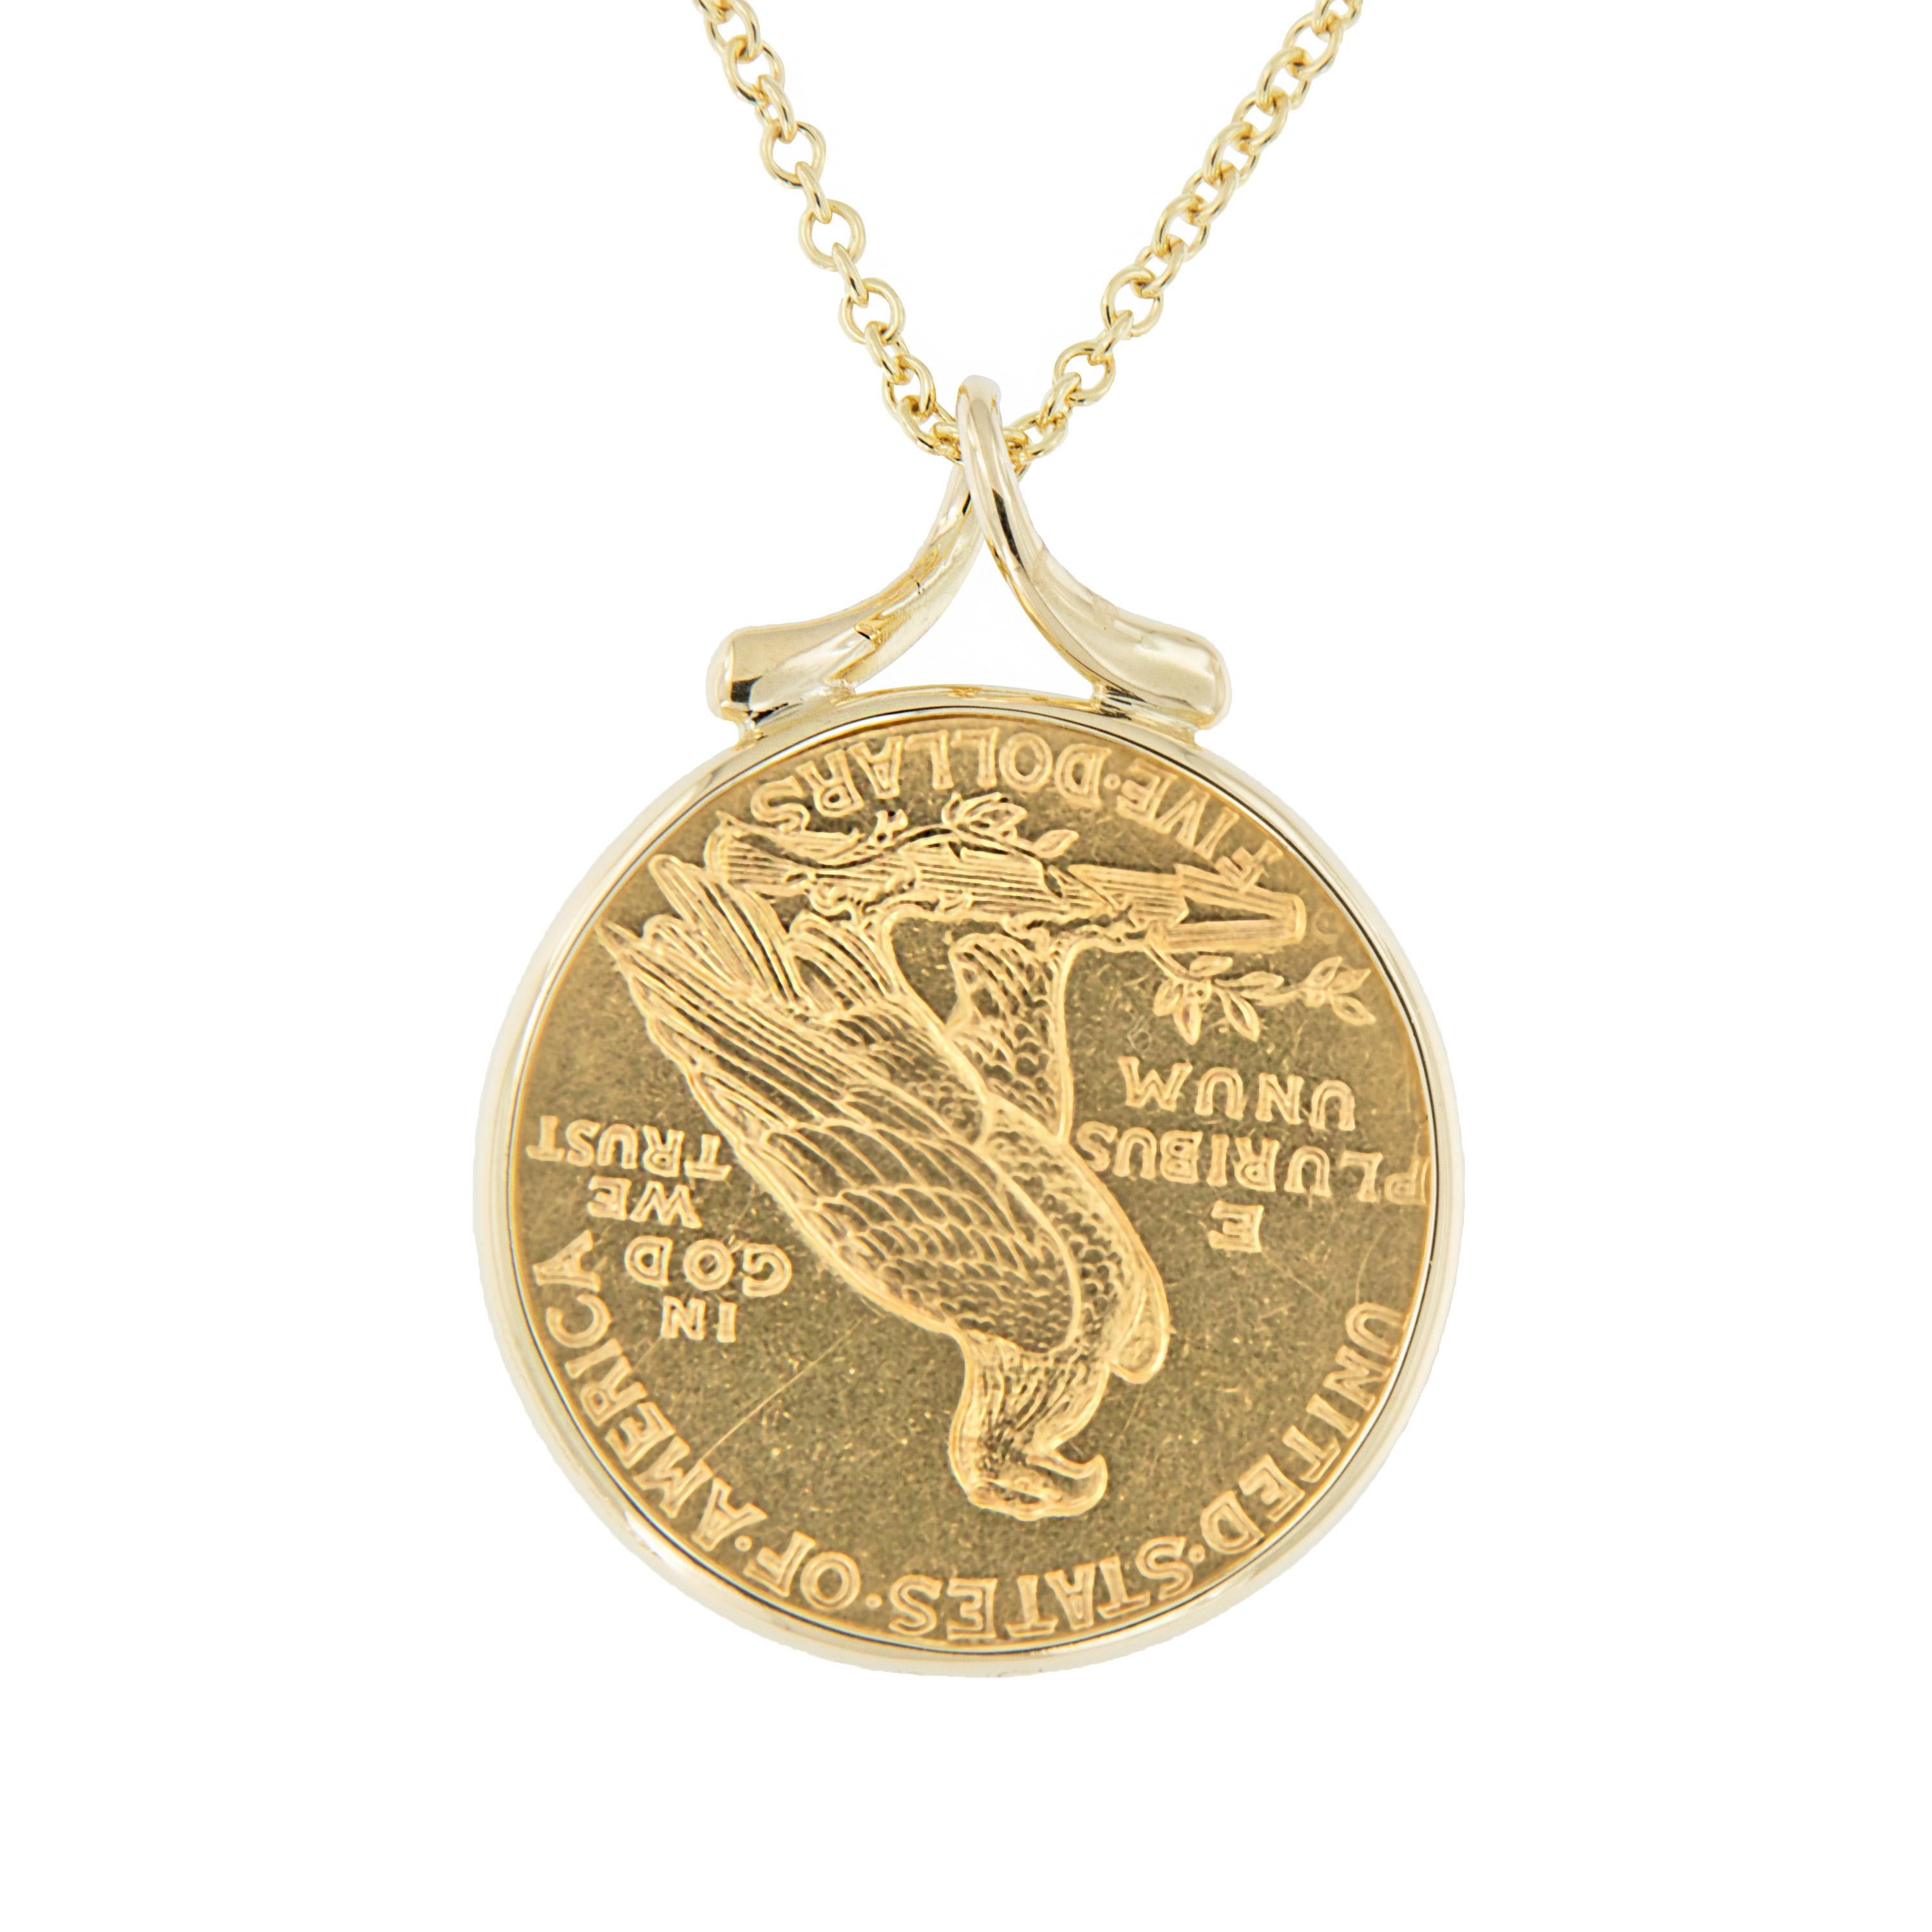 Enjoy a piece of American gold coin history! This 1925 $2.50 Indian head quarter eagle coin is framed in 18k yellow gold and suspends from a ribbon-style bail on a 16-inch chain. Pendant measures 27.5mm tall x 19mm wide. Signature wrapping and